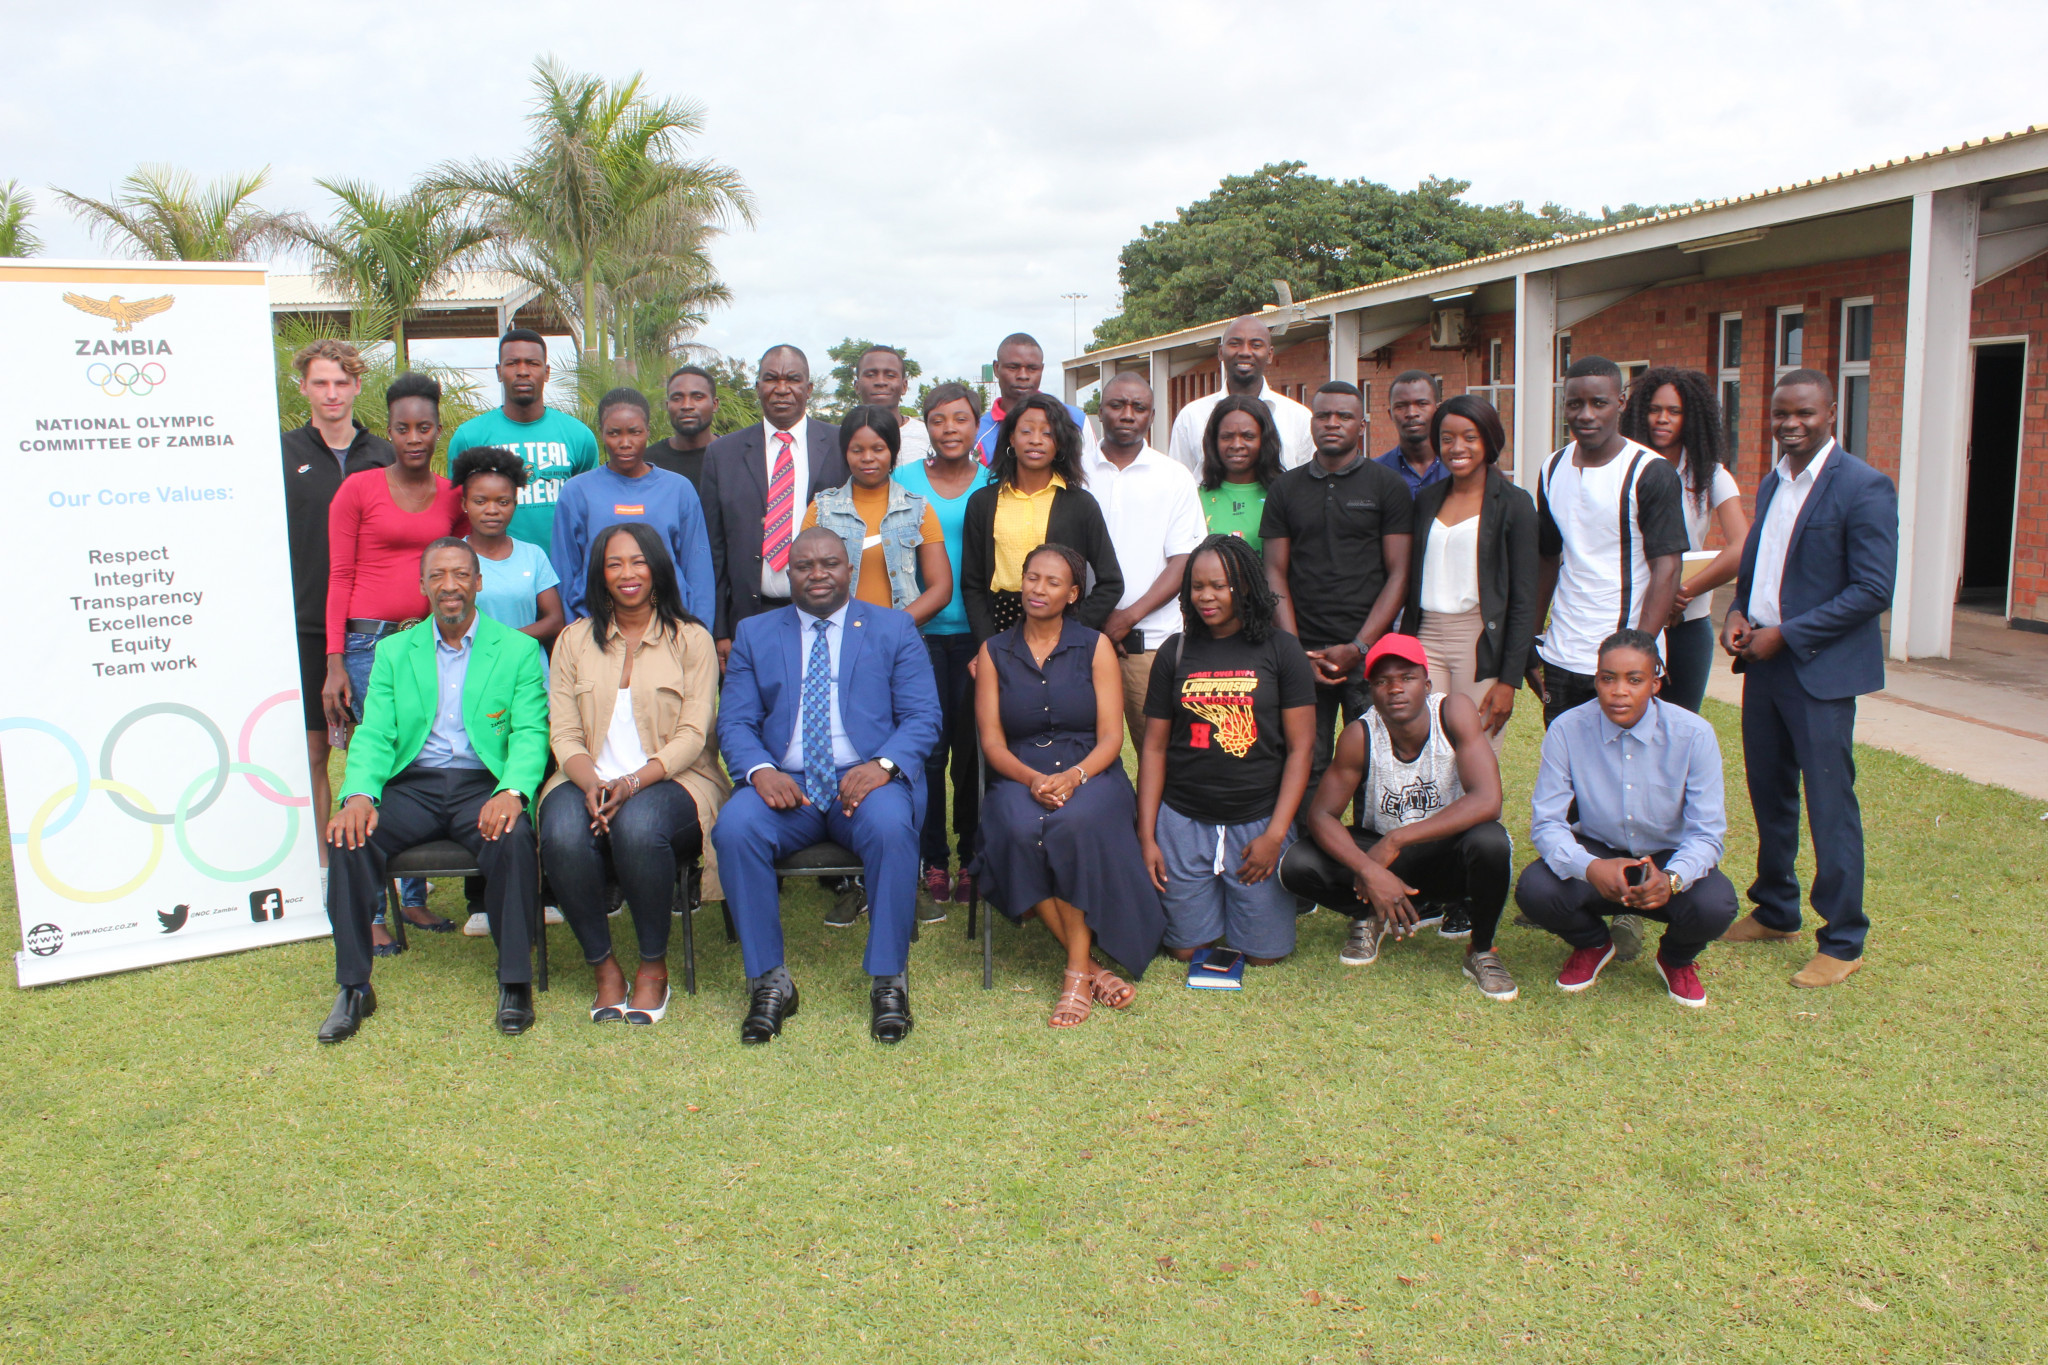 The National Olympic Committee of Zambia has officially launched its first-ever Athletes' Commission with a workshop at the Olympic Youth Development Centre in Lusaka ©NOCZ